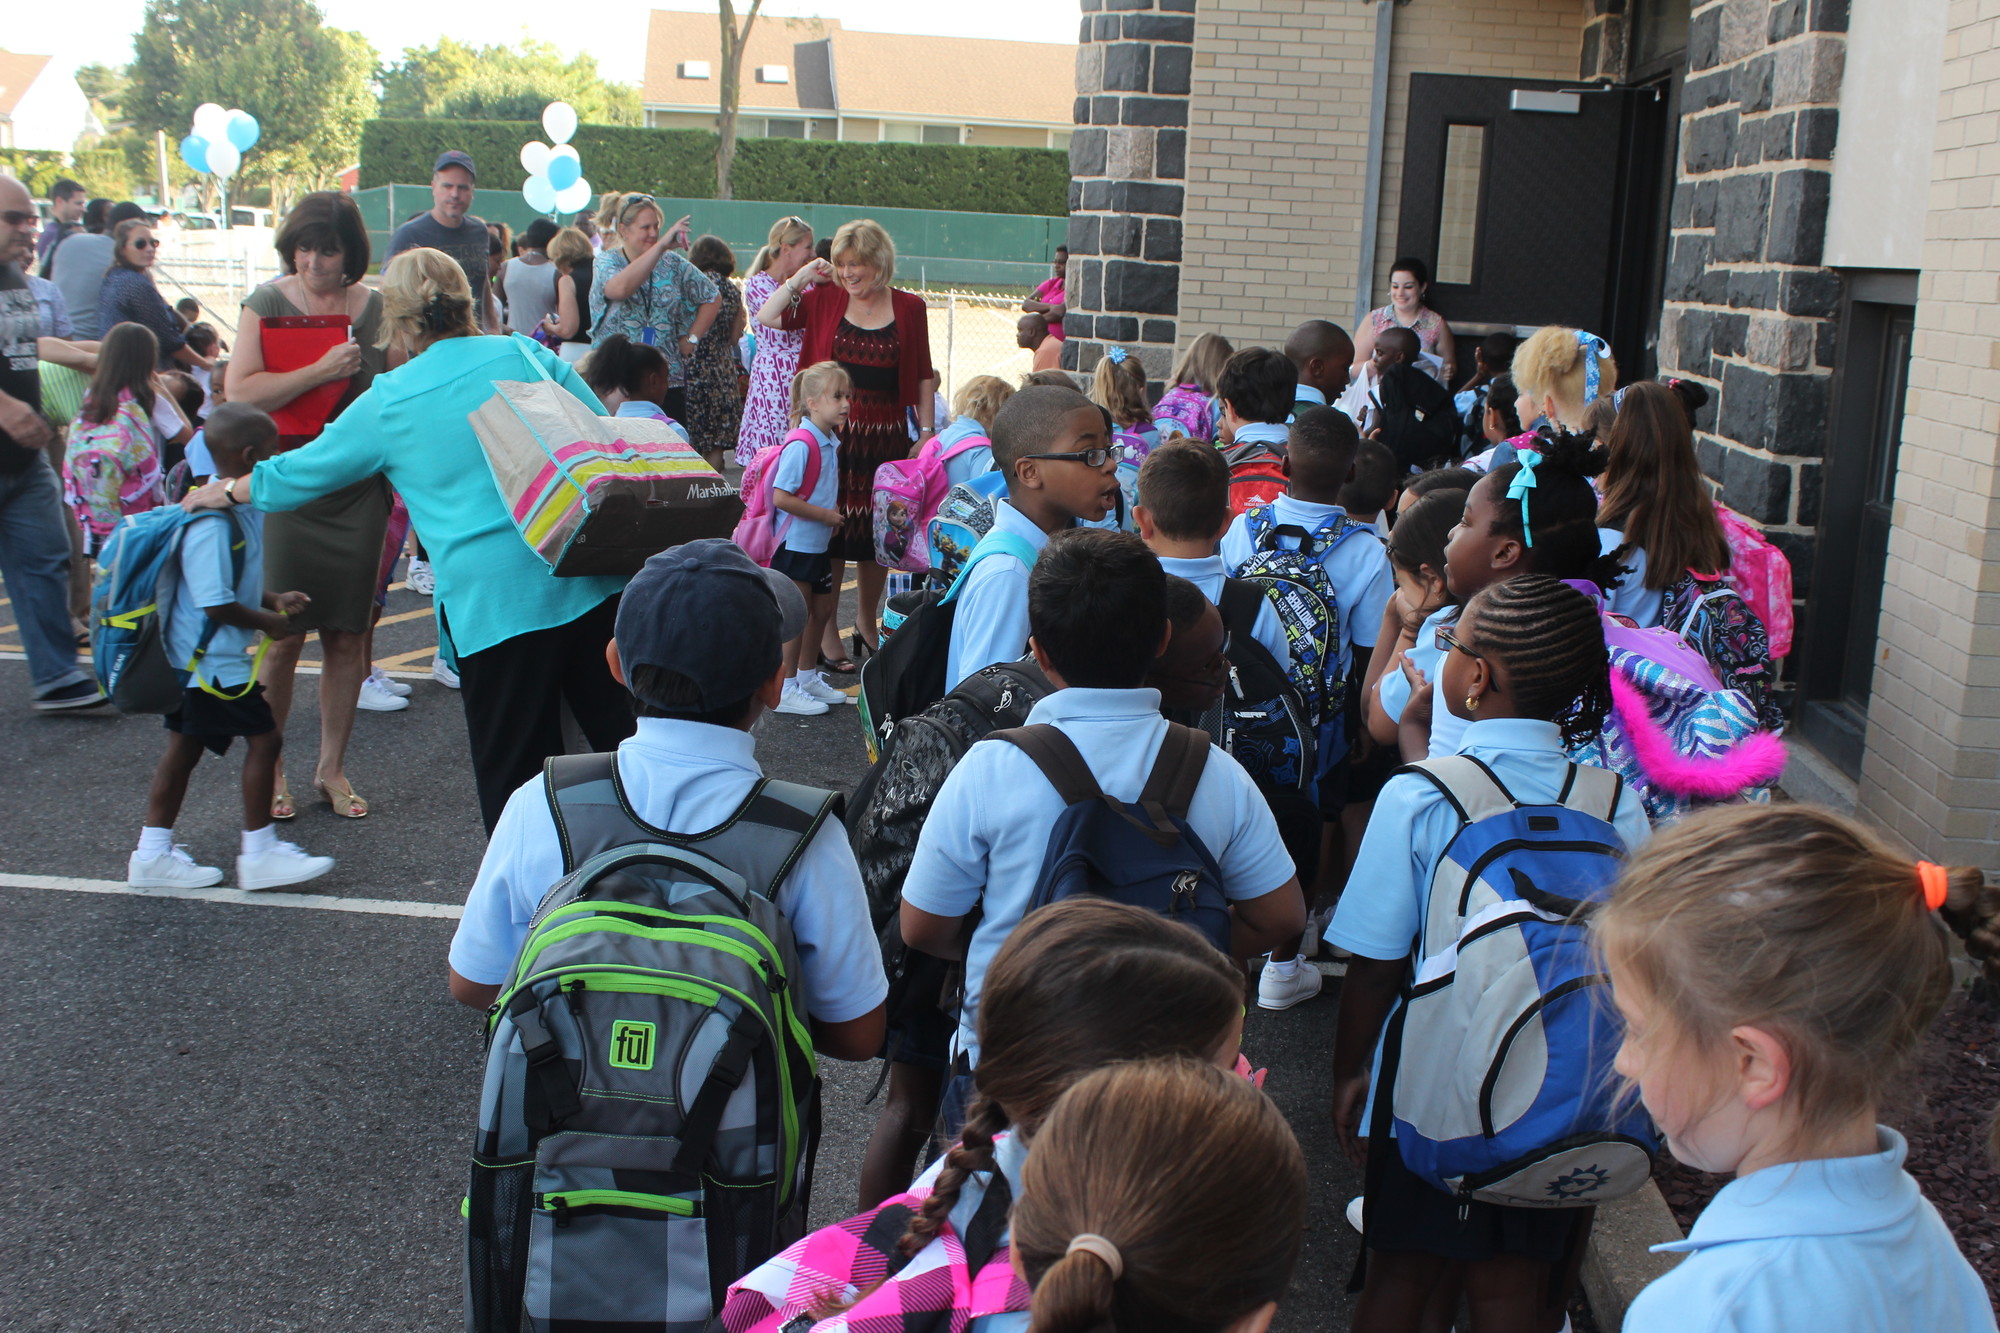 Students were excited to go in for their first day of school at St. Christopher School.